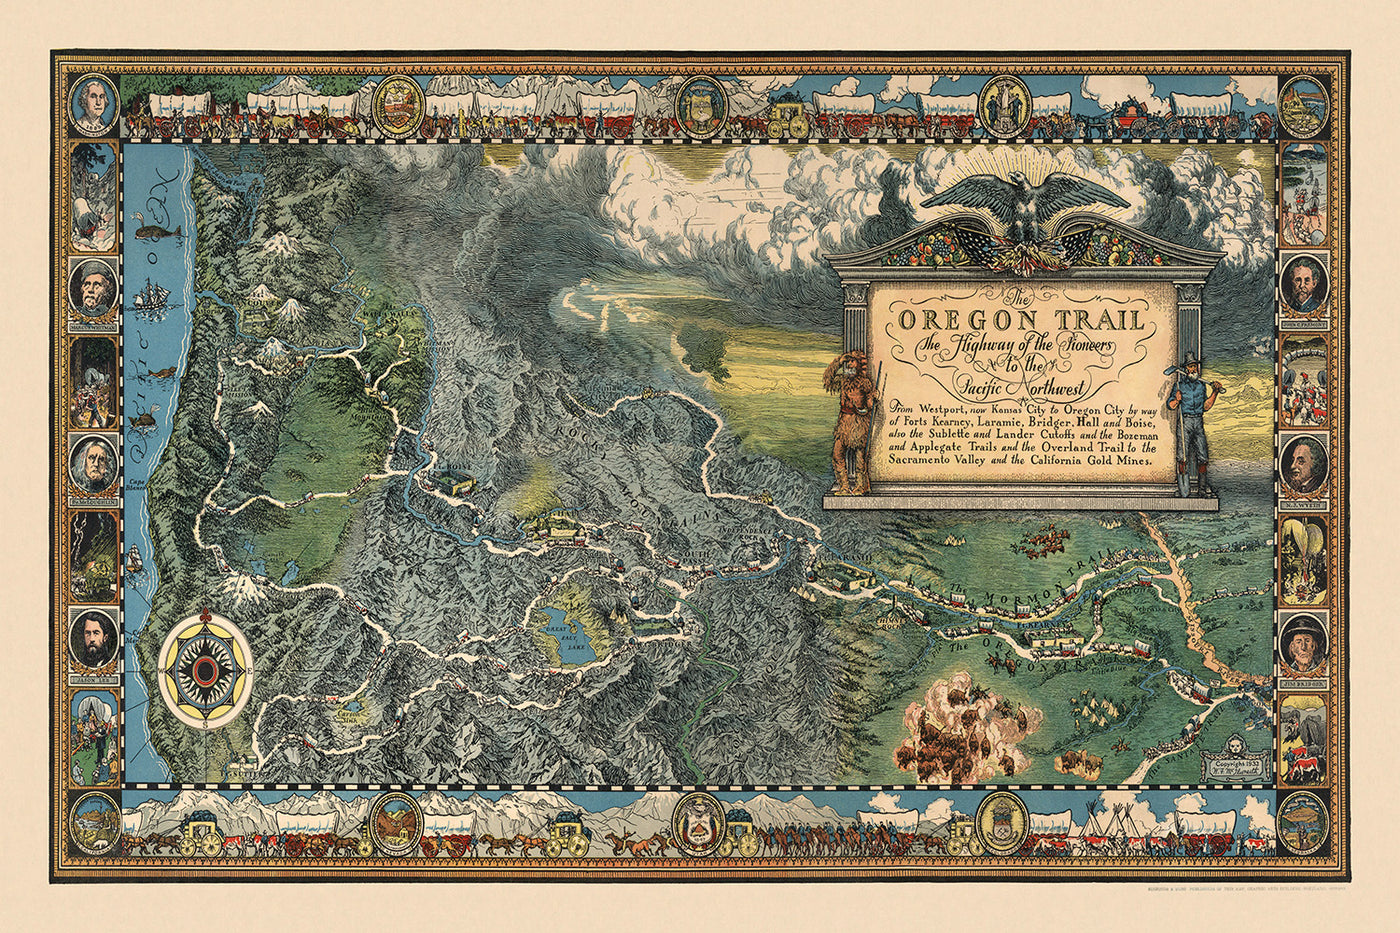 Old Map of the Oregon Trail by William Forsyth McIlwraith, 1932: Mormon Trail, Westport, Whitman Mission, Ft. Vancouver